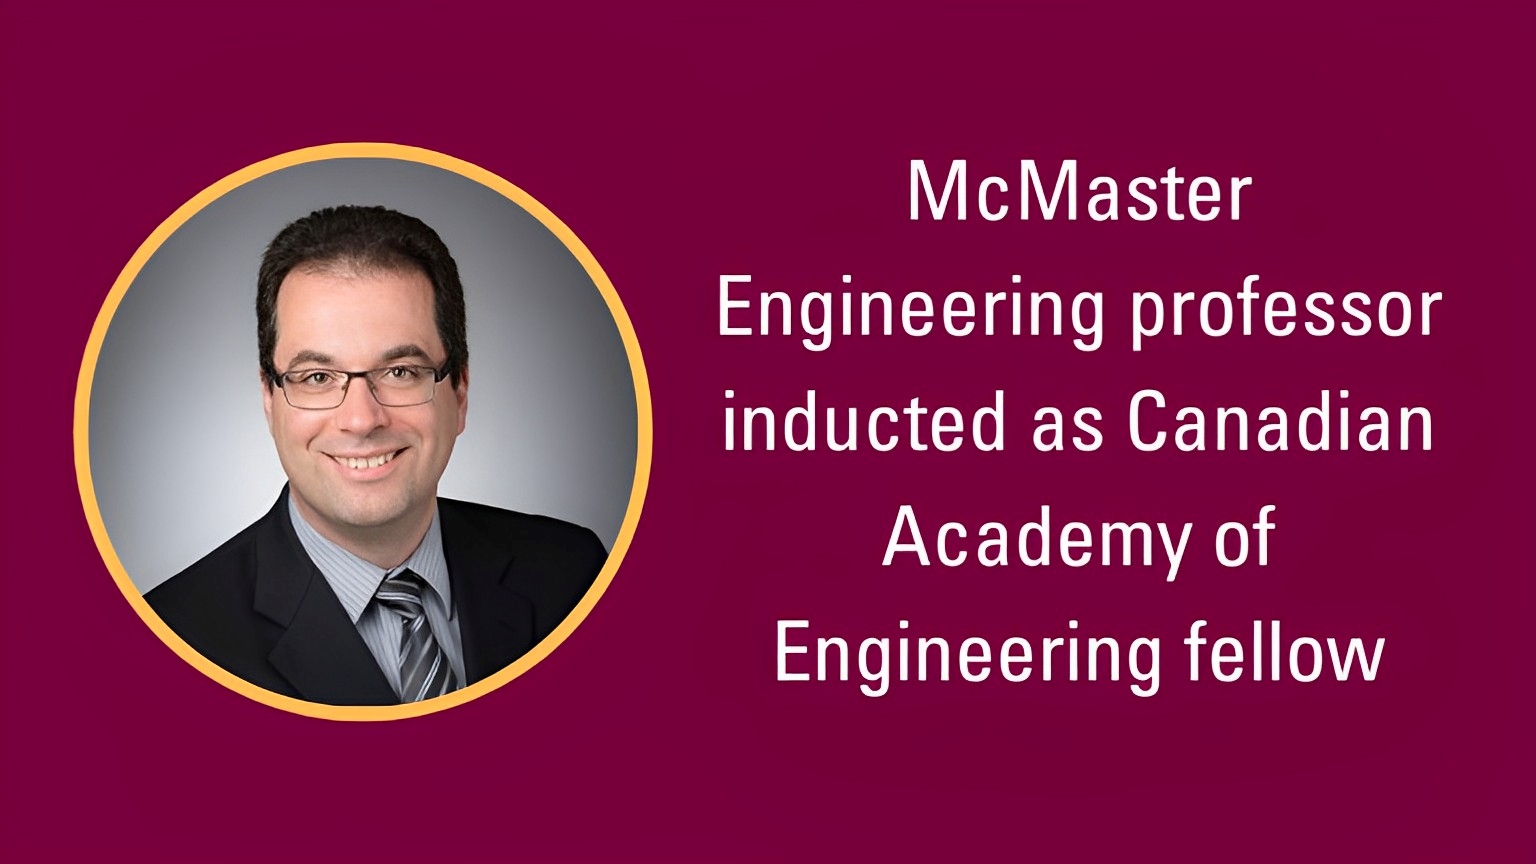 Steve Hranilovic was inducted as Canadian Academy of Engineering Fellow